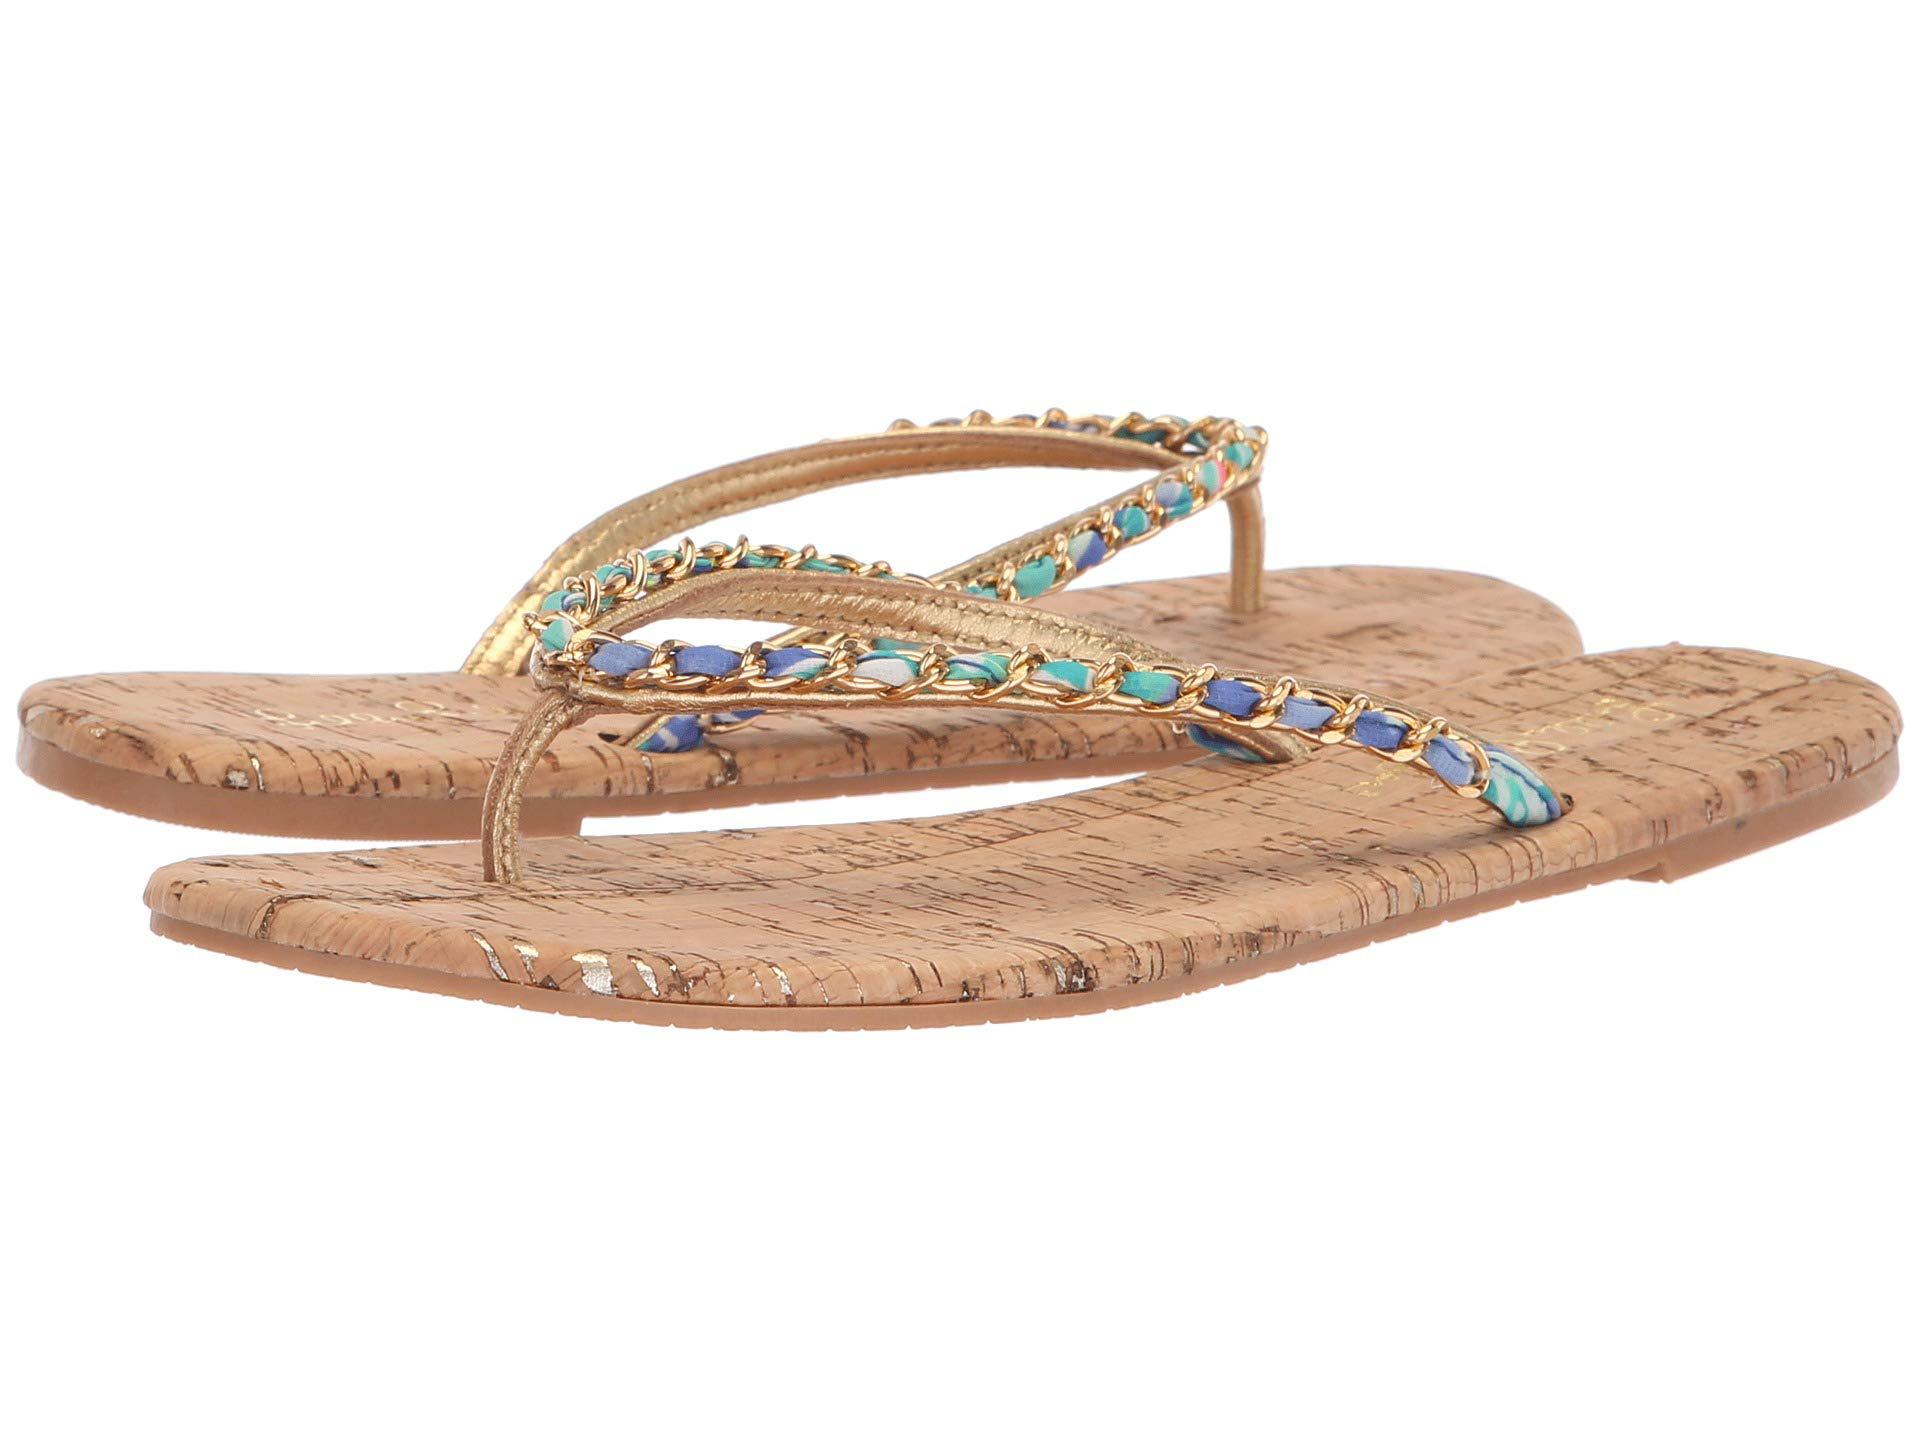 Lyst - Lilly Pulitzer Naples Sandal (natural) Women's Dress Sandals in ...